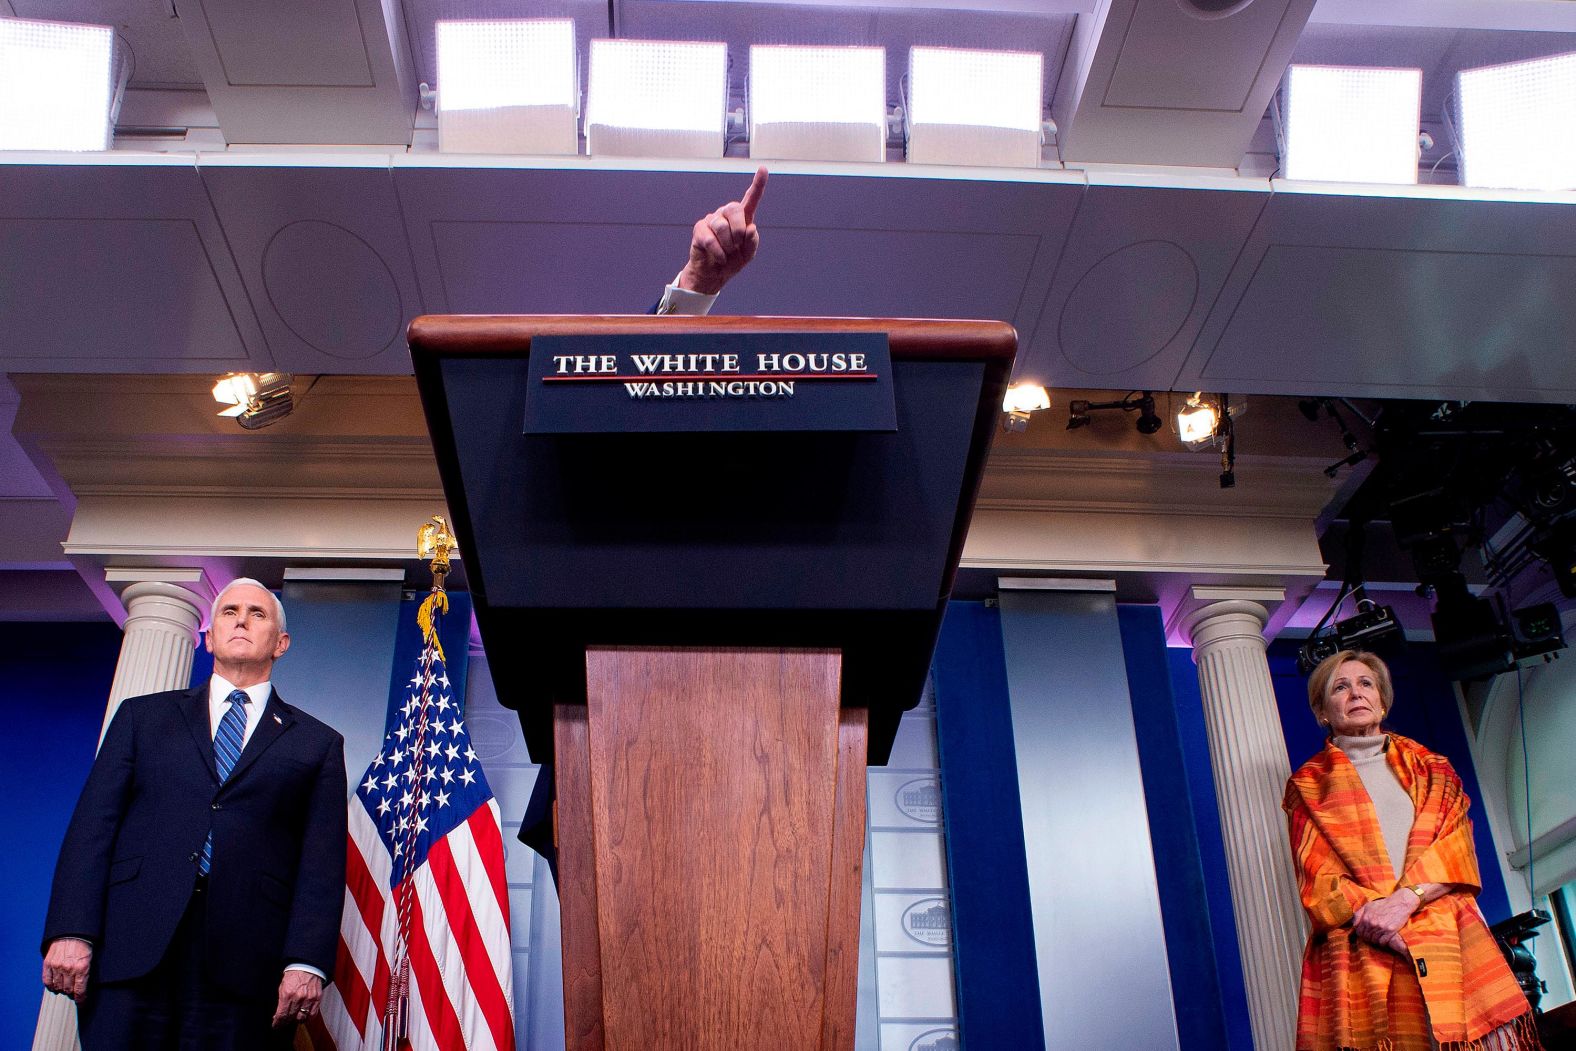 Trump — flanked by Vice President Mike Pence and Dr. Deborah Birx, the White House coronavirus response coordinator — gestures over the lectern as he speaks on April 3. <a href="index.php?page=&url=https%3A%2F%2Ftwitter.com%2Fweijia%2Fstatus%2F1246213280839933952" target="_blank" target="_blank">Weijia Jiang of CBS News asked Trump</a> to clarify what his son-in-law Jared Kushner meant by the word "our" at the previous day's briefing when he said: "the notion of the federal stockpile was it's supposed to be our stockpile — it's not supposed to be state stockpiles that they then use." Trump responded: "You know what 'our' means? The United States of America — that's what it means. ... And then we take that 'our' and we distribute it to the states." He also added: "It's such a basic, simple question and you try and make it sound so bad. You ought to be ashamed of yourself."